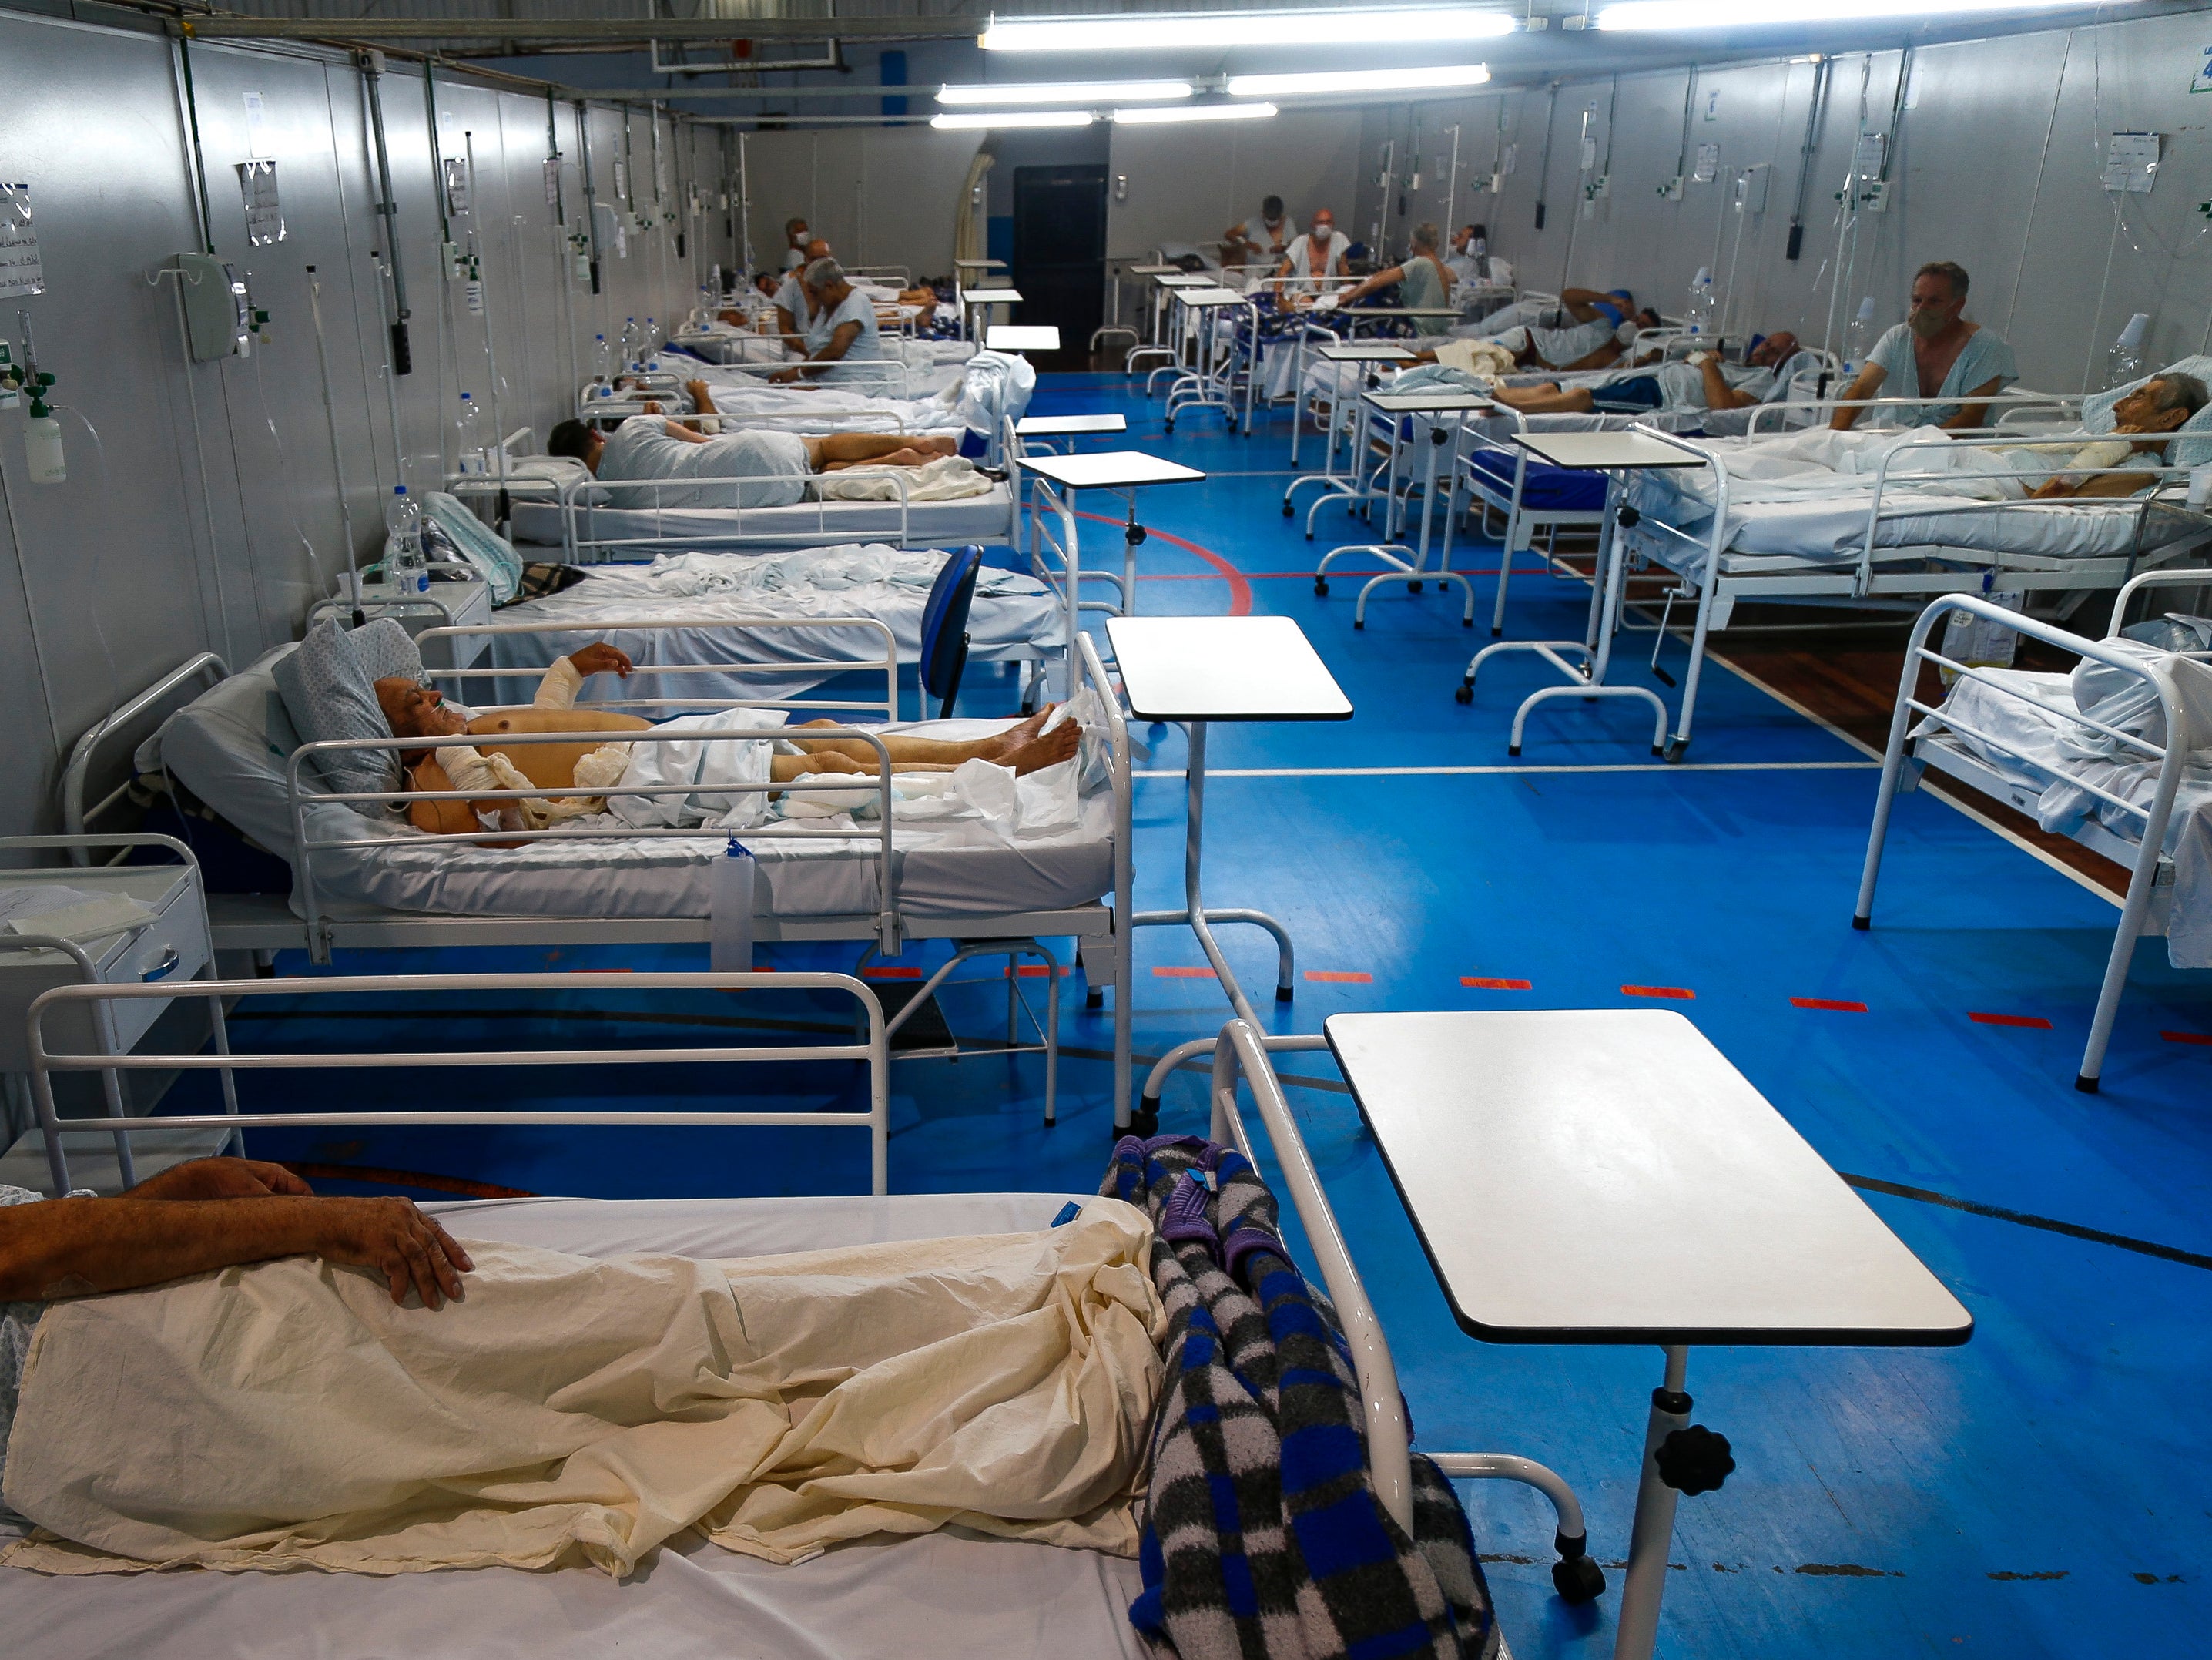 Covid patients are treated at a field hospital set up at a sports gym, in Santo Andre, Sao Paulo state, Brazil, in March